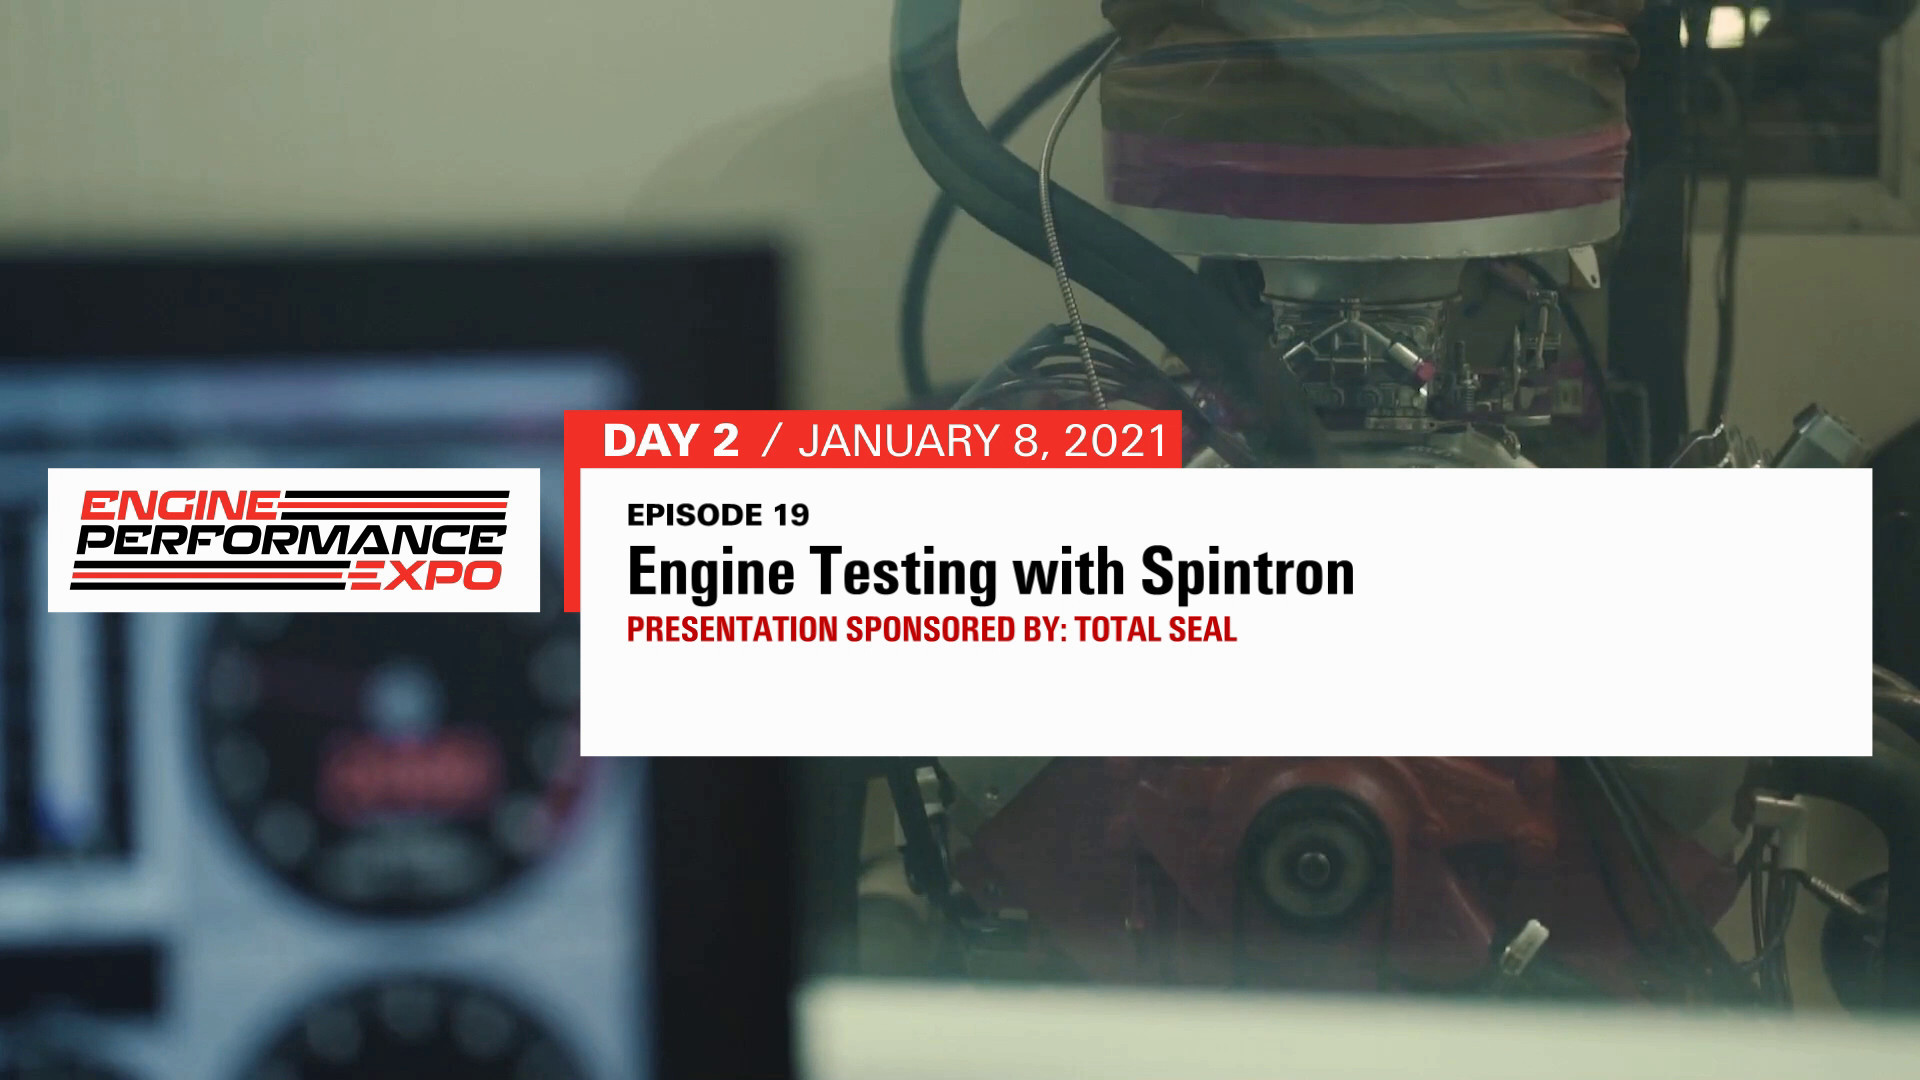 Episode 19 - Engine Testing with Spintron